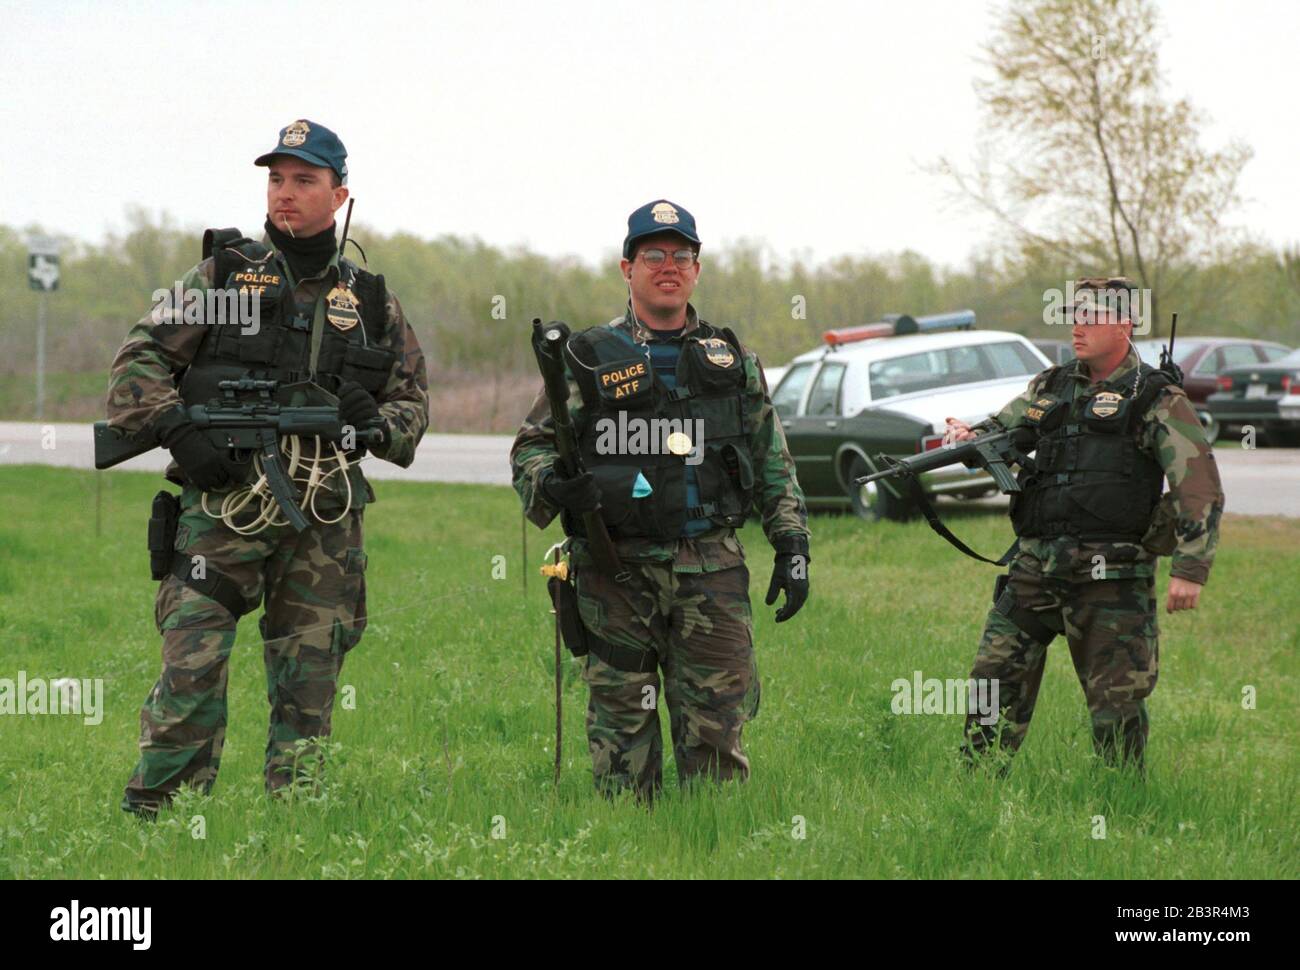 Waco Texas USA, March 1993: ATF agents guard a road leading to the Branch Davidian compound outside Waco during the 51-day standoff with the followers of David Koresh. ©Bob Daemmrich Stock Photo